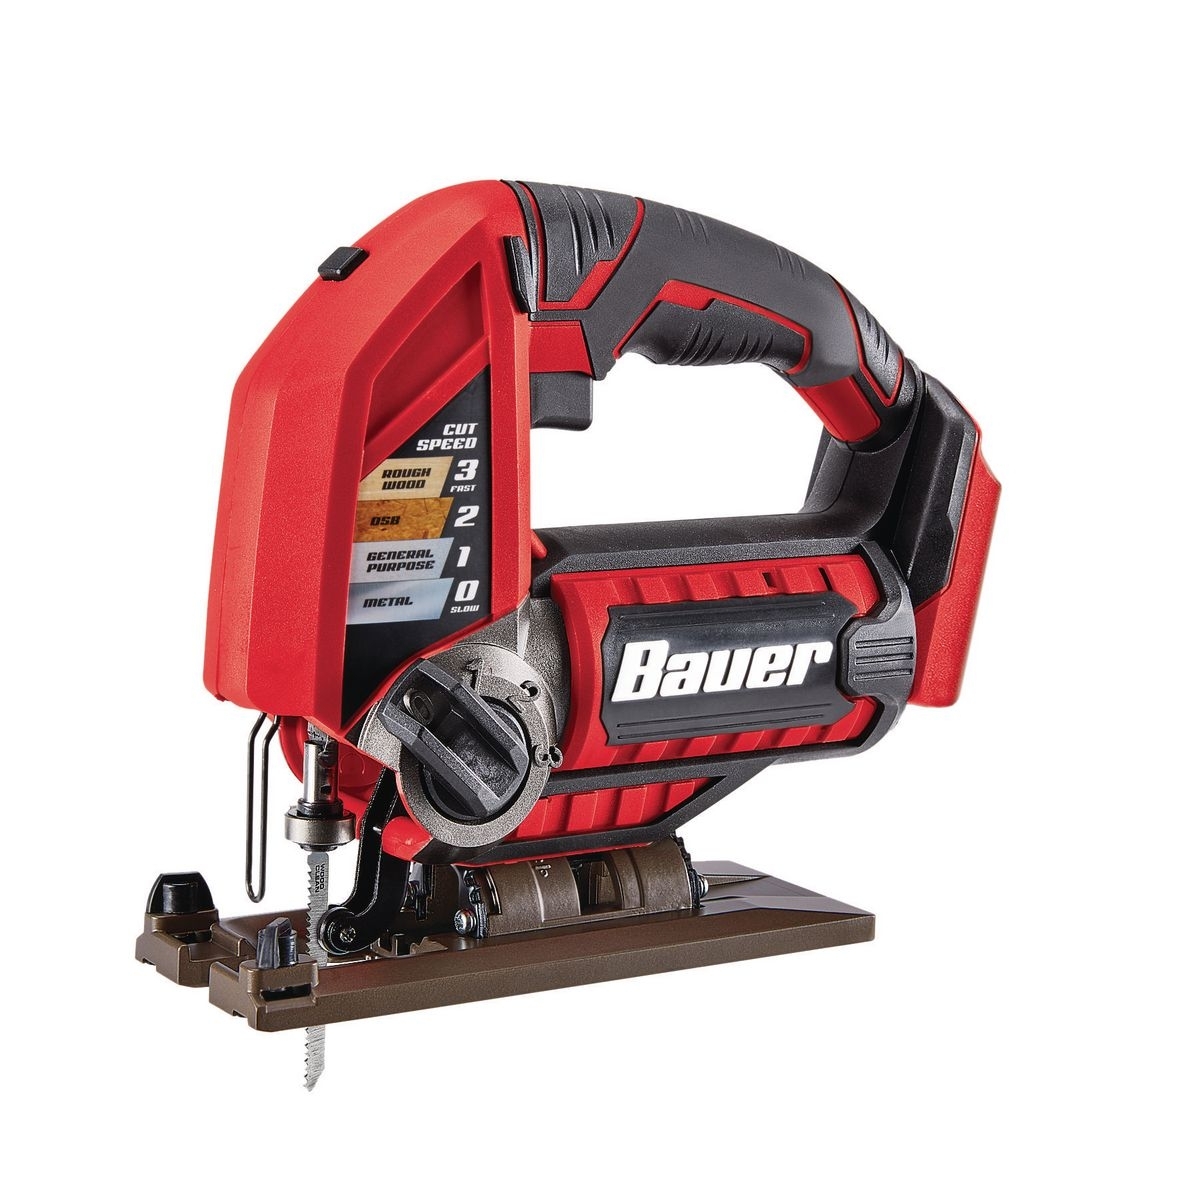 BAUER 20v Cordless Variable Speed Jig Saw – Tool Only – Item 63630